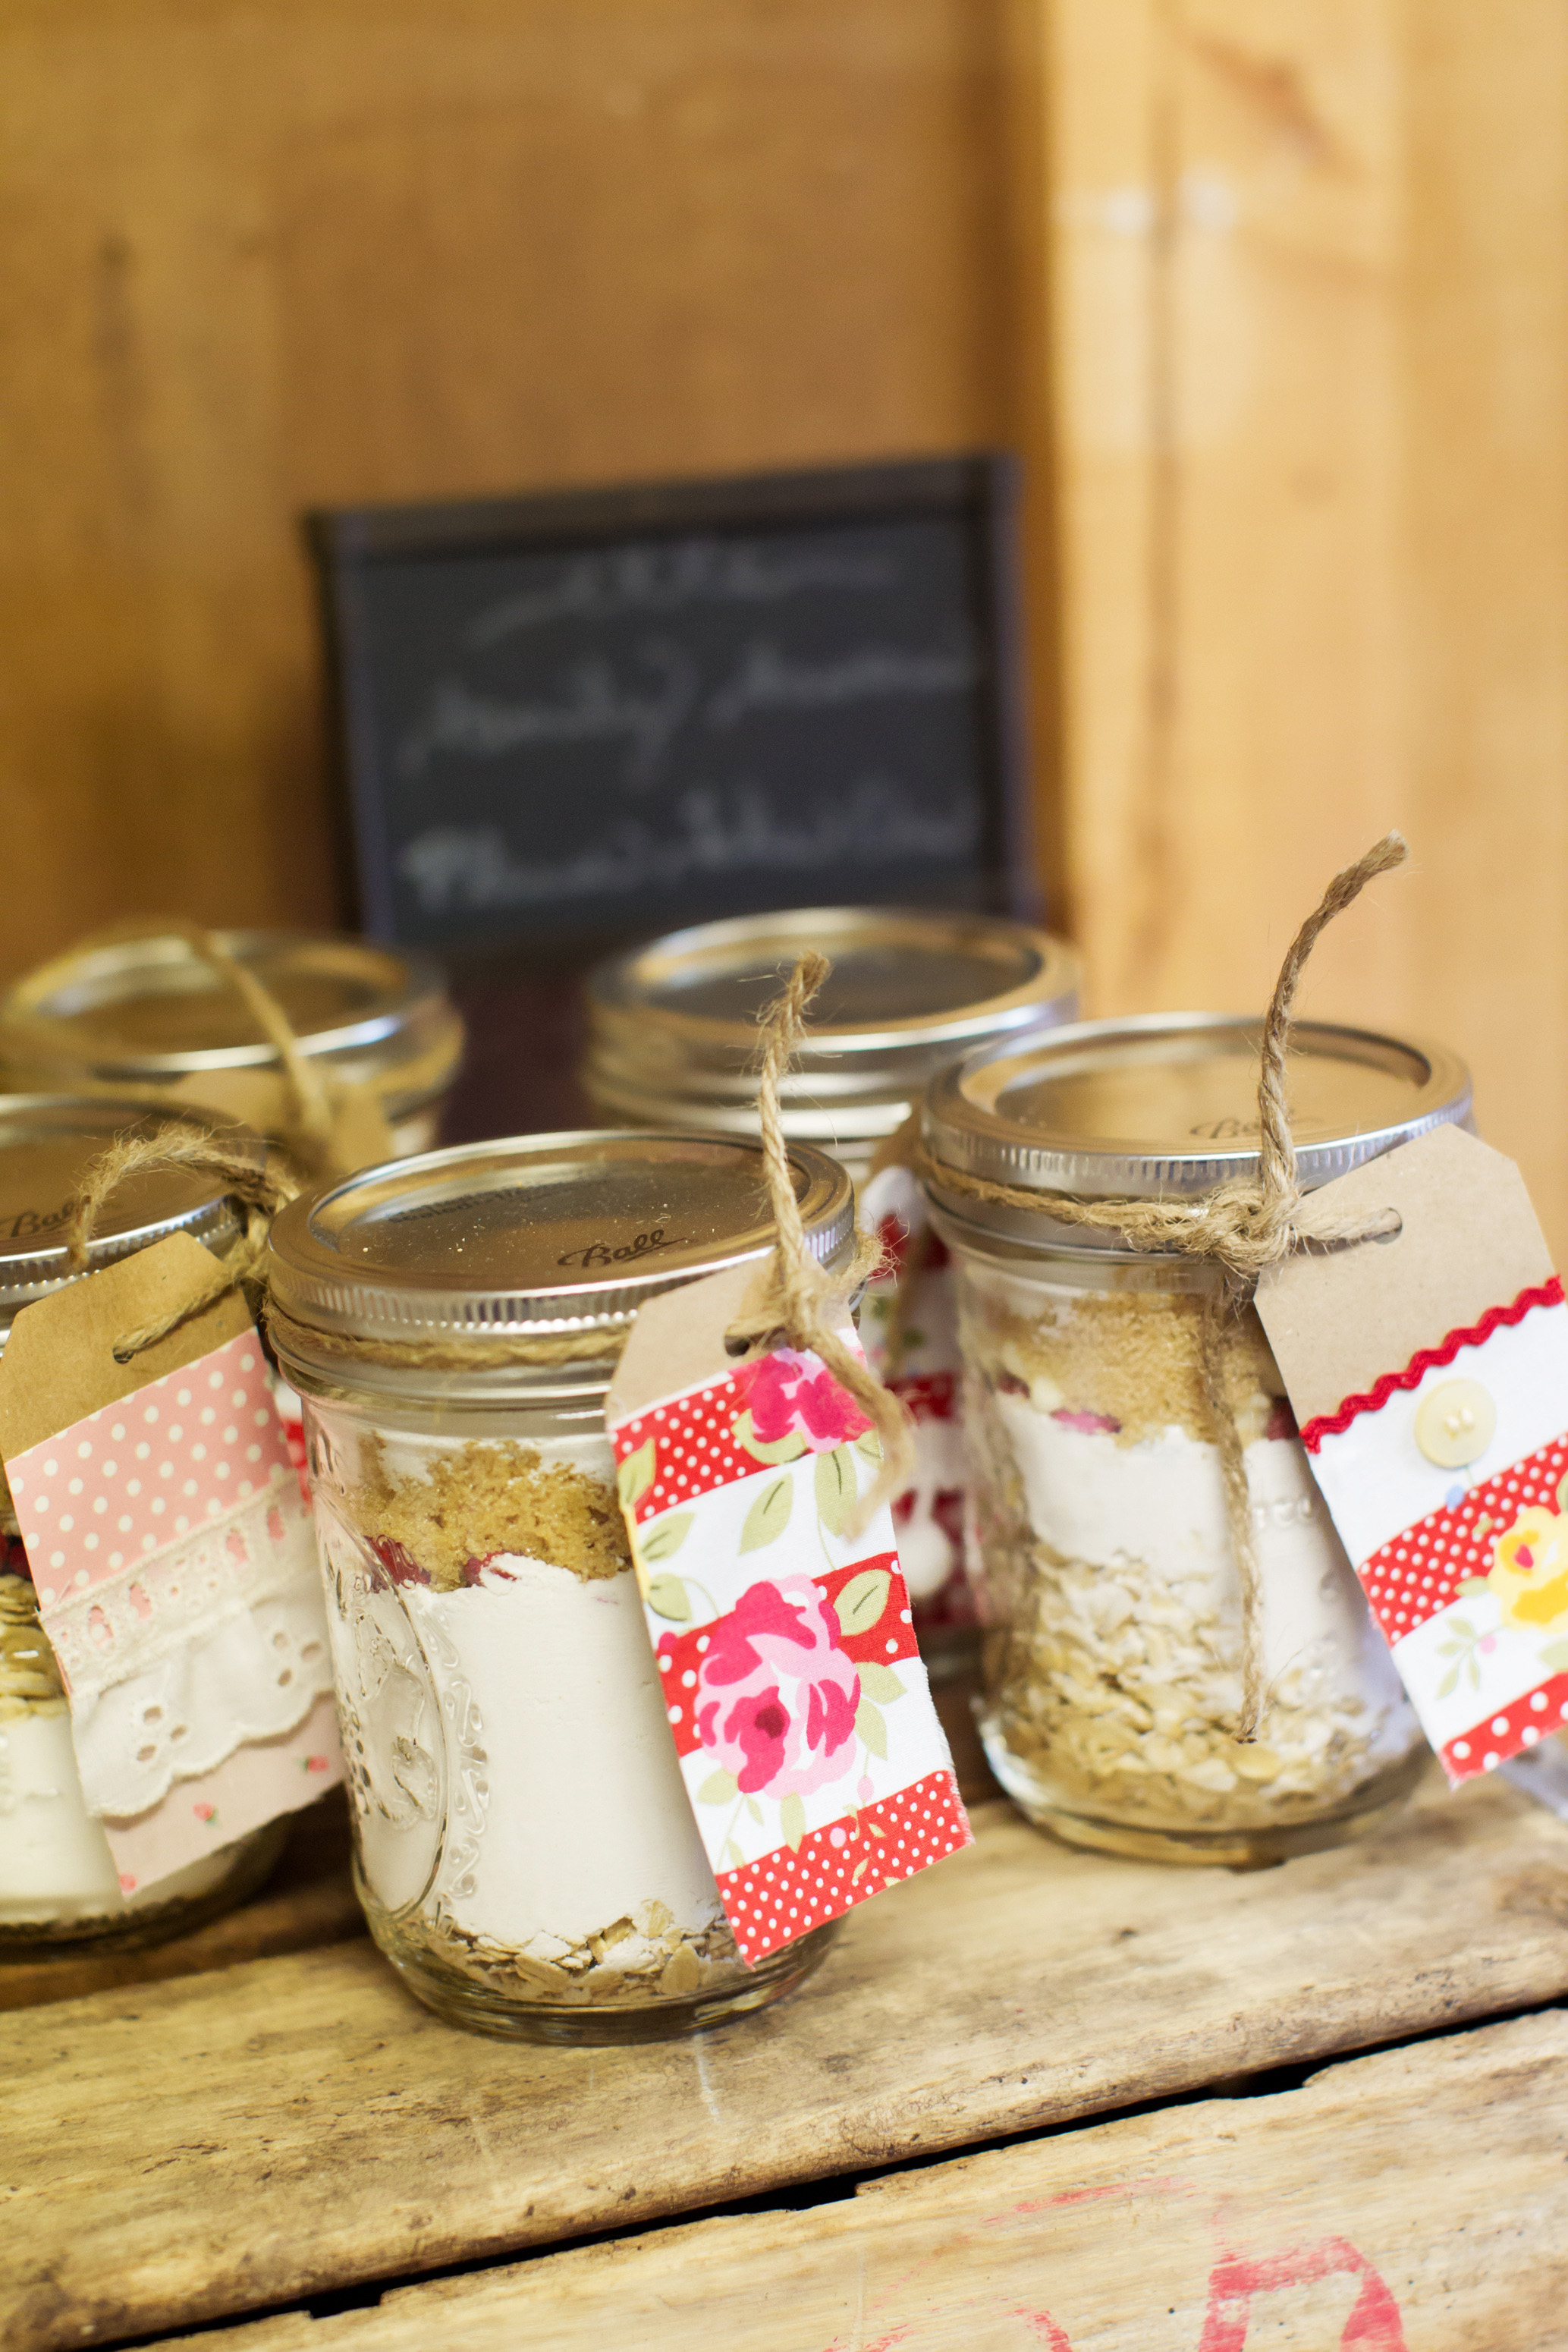 Jars of Cookie Mix with Handmade Tags for this Vintage Picnic Birthday